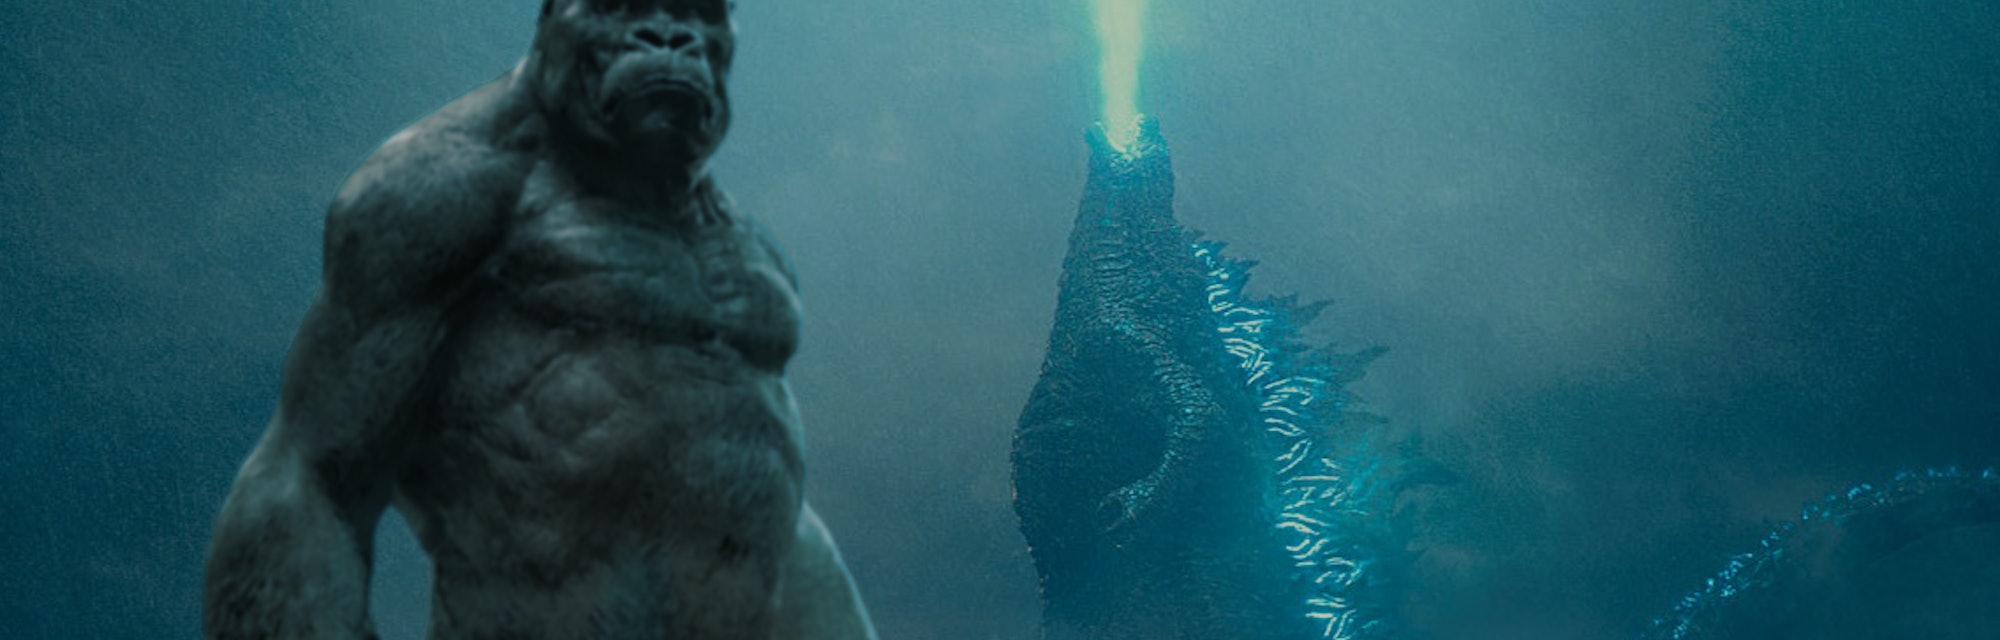 Godzilla King Of The Monsters And Kong Skull Island Share A Character